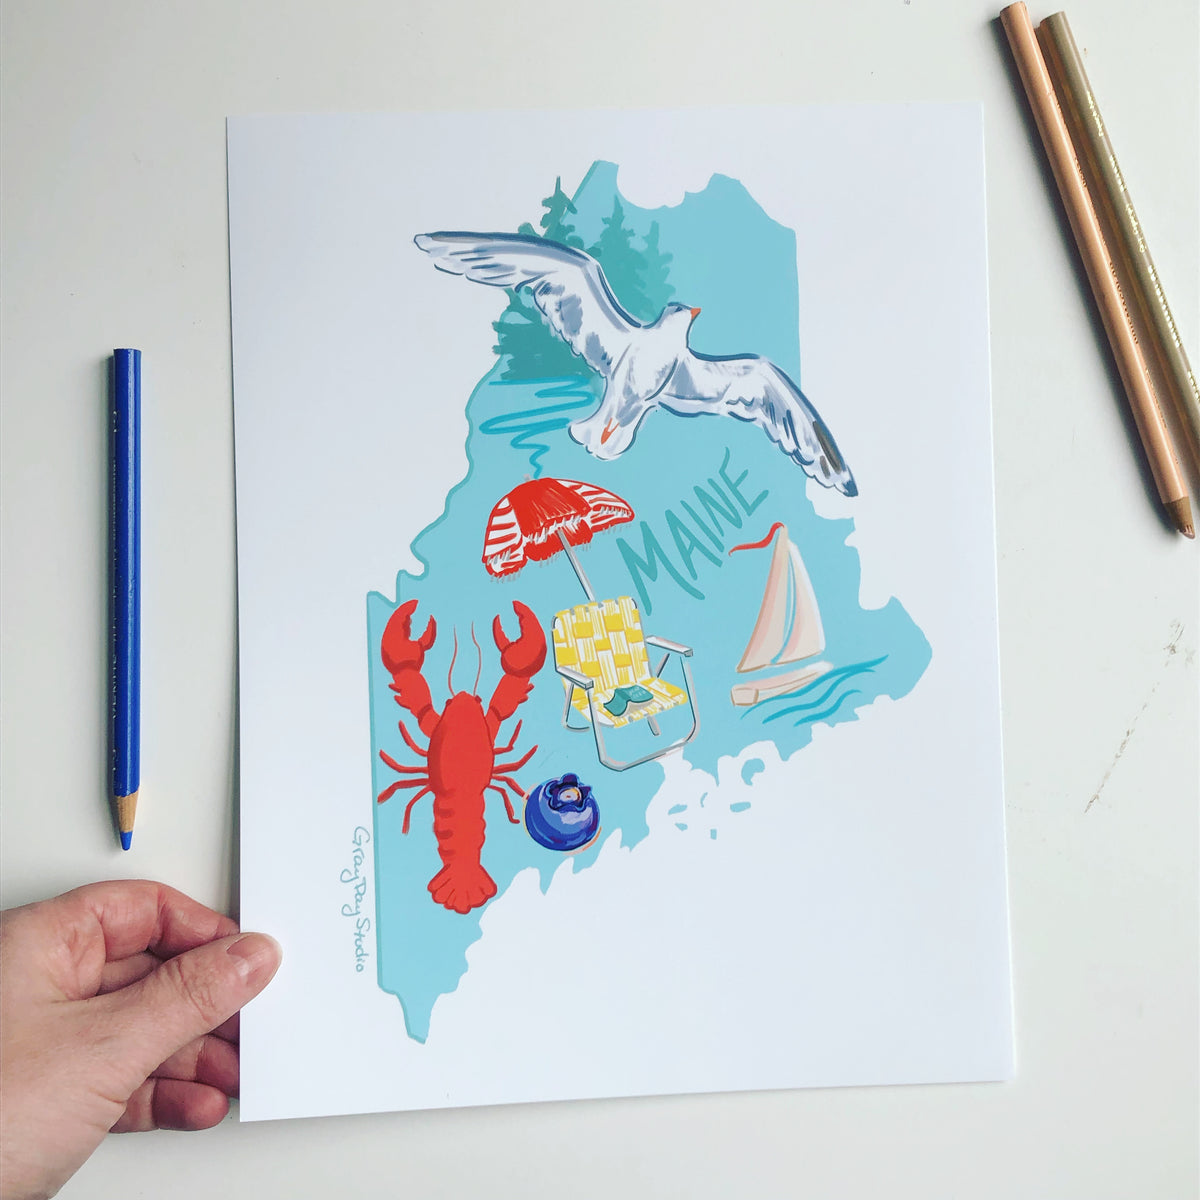 State of Maine artowrk featuring a seagull, sailboat, lobster, blueberry, beach chair and umbrella.